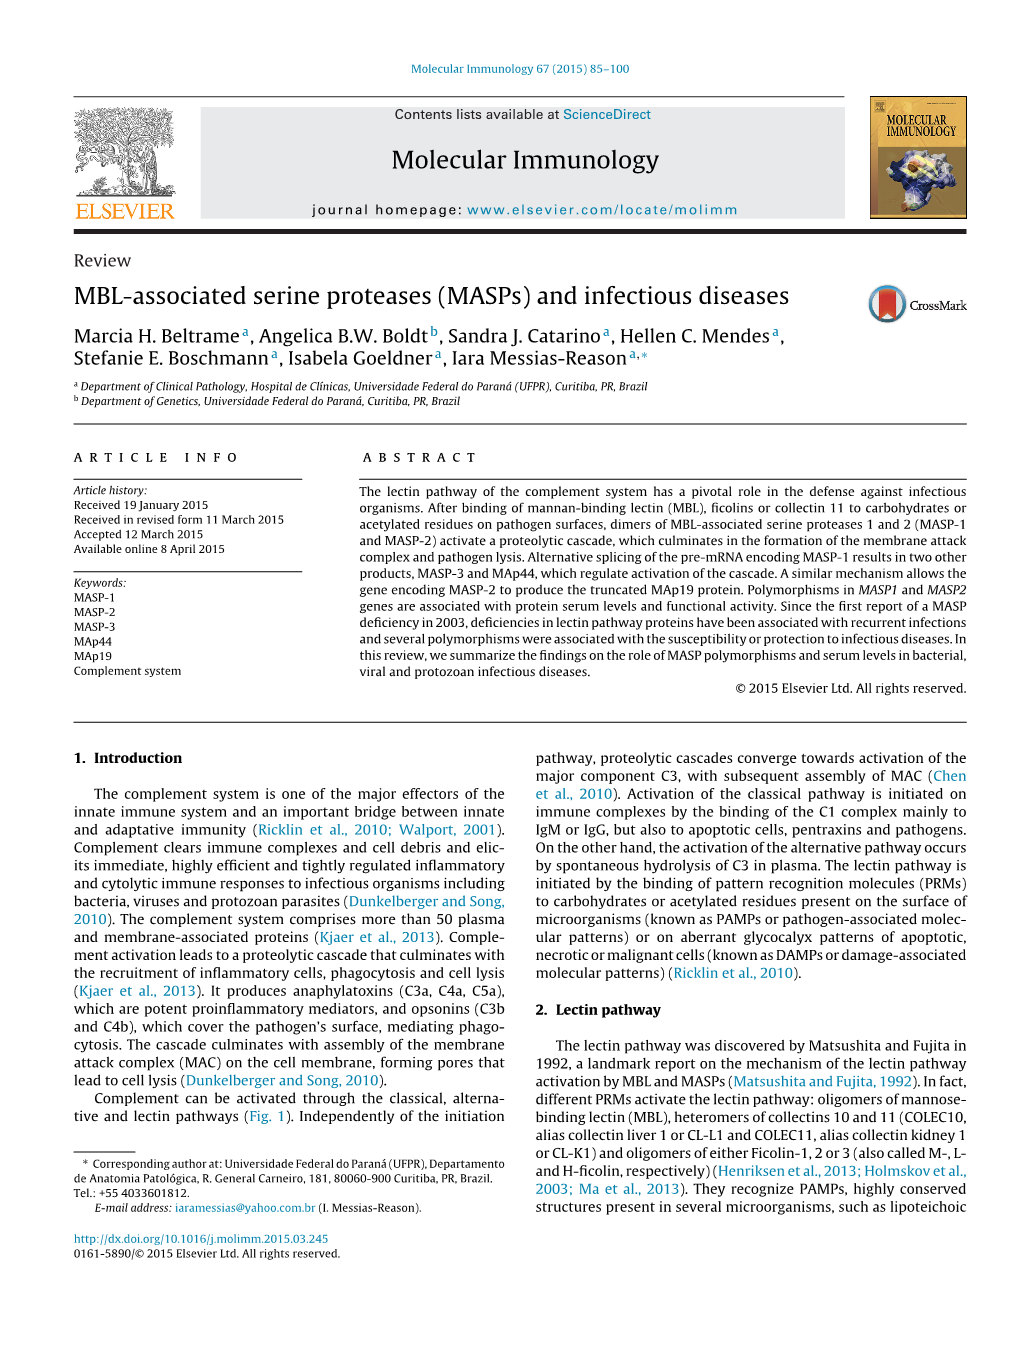 MBL-Associated Serine Proteases (Masps) and Infectious Diseases